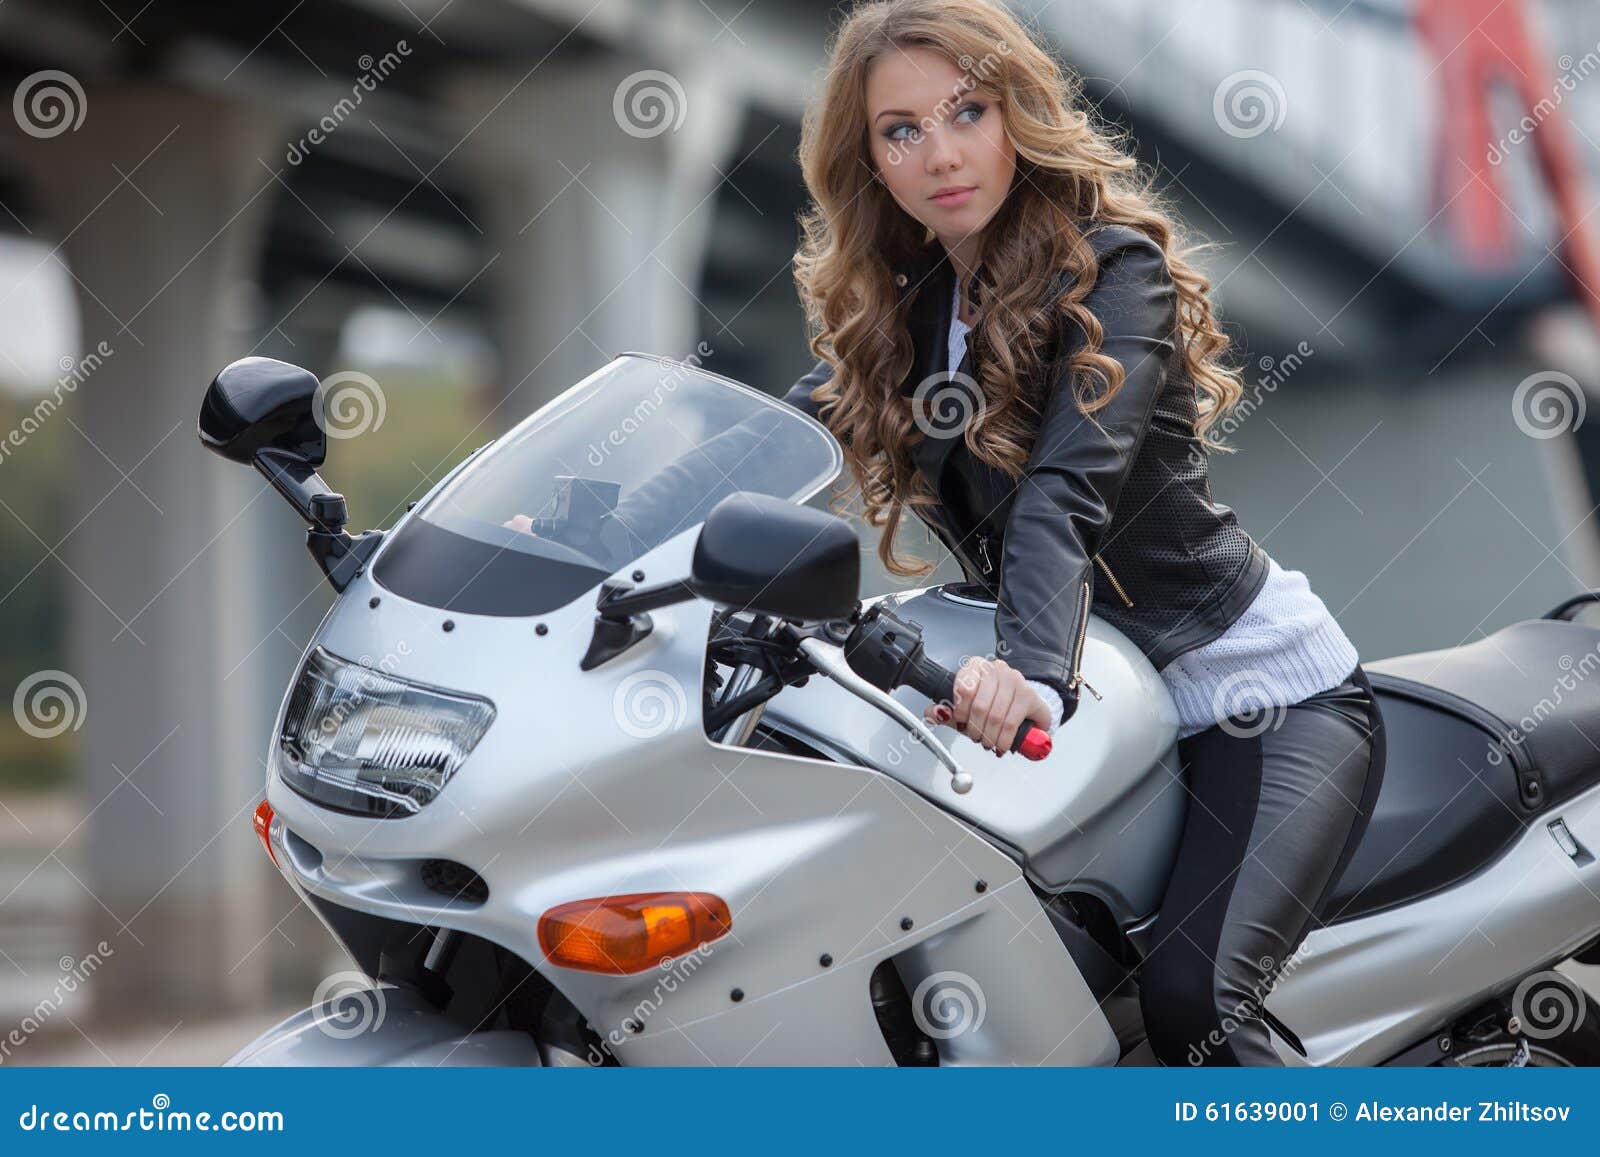 Woman on motorcycle stock image. Image of outdoors, caucasian - 61639001